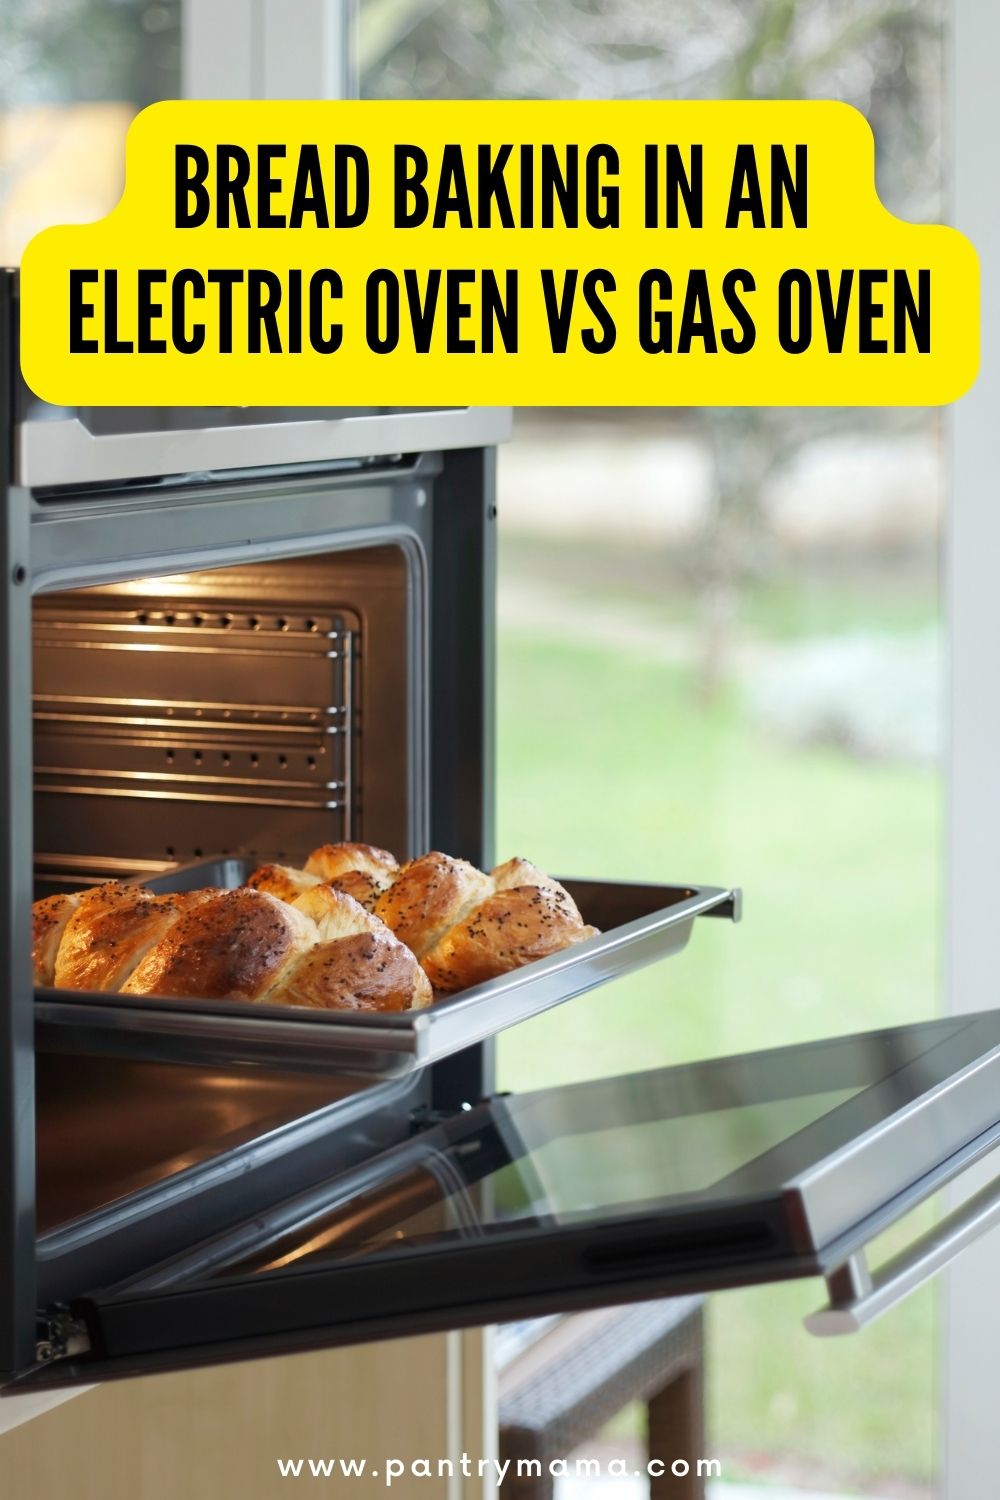 Electric Ovens Fires